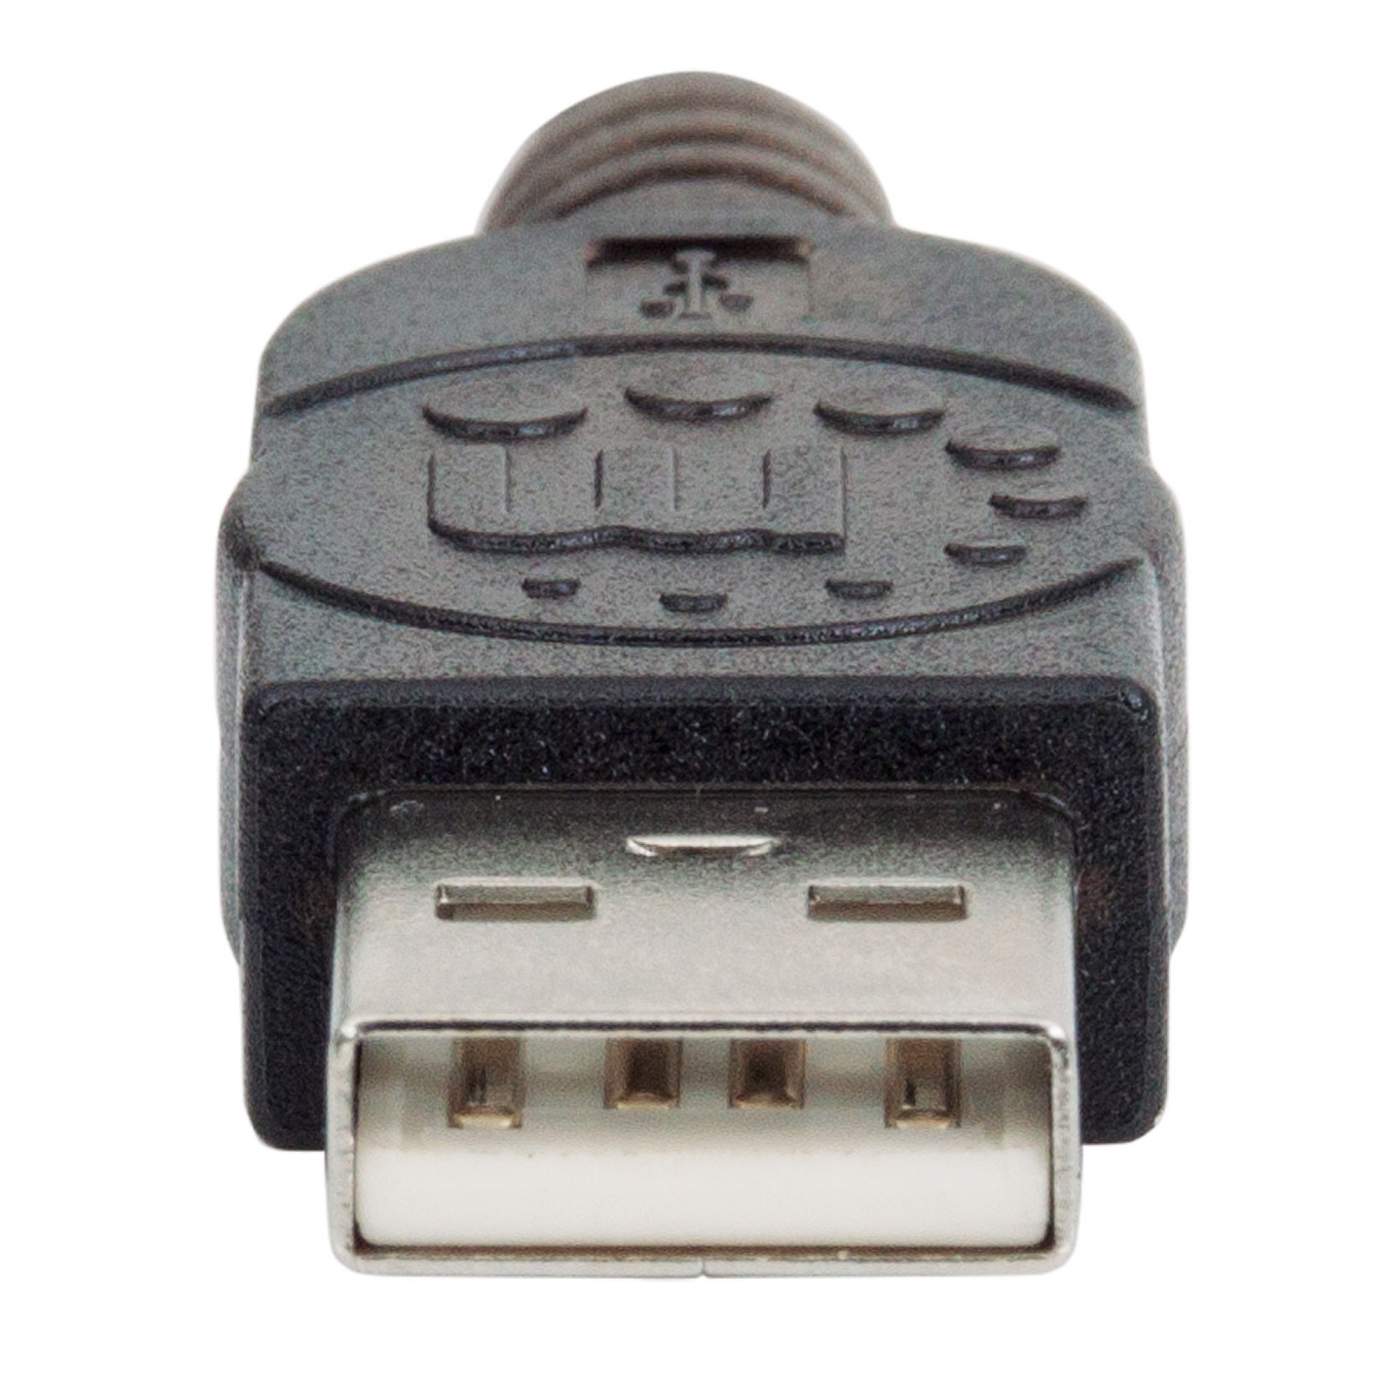 Hi-Speed USB 2.0 Active Extension Cable Image 5